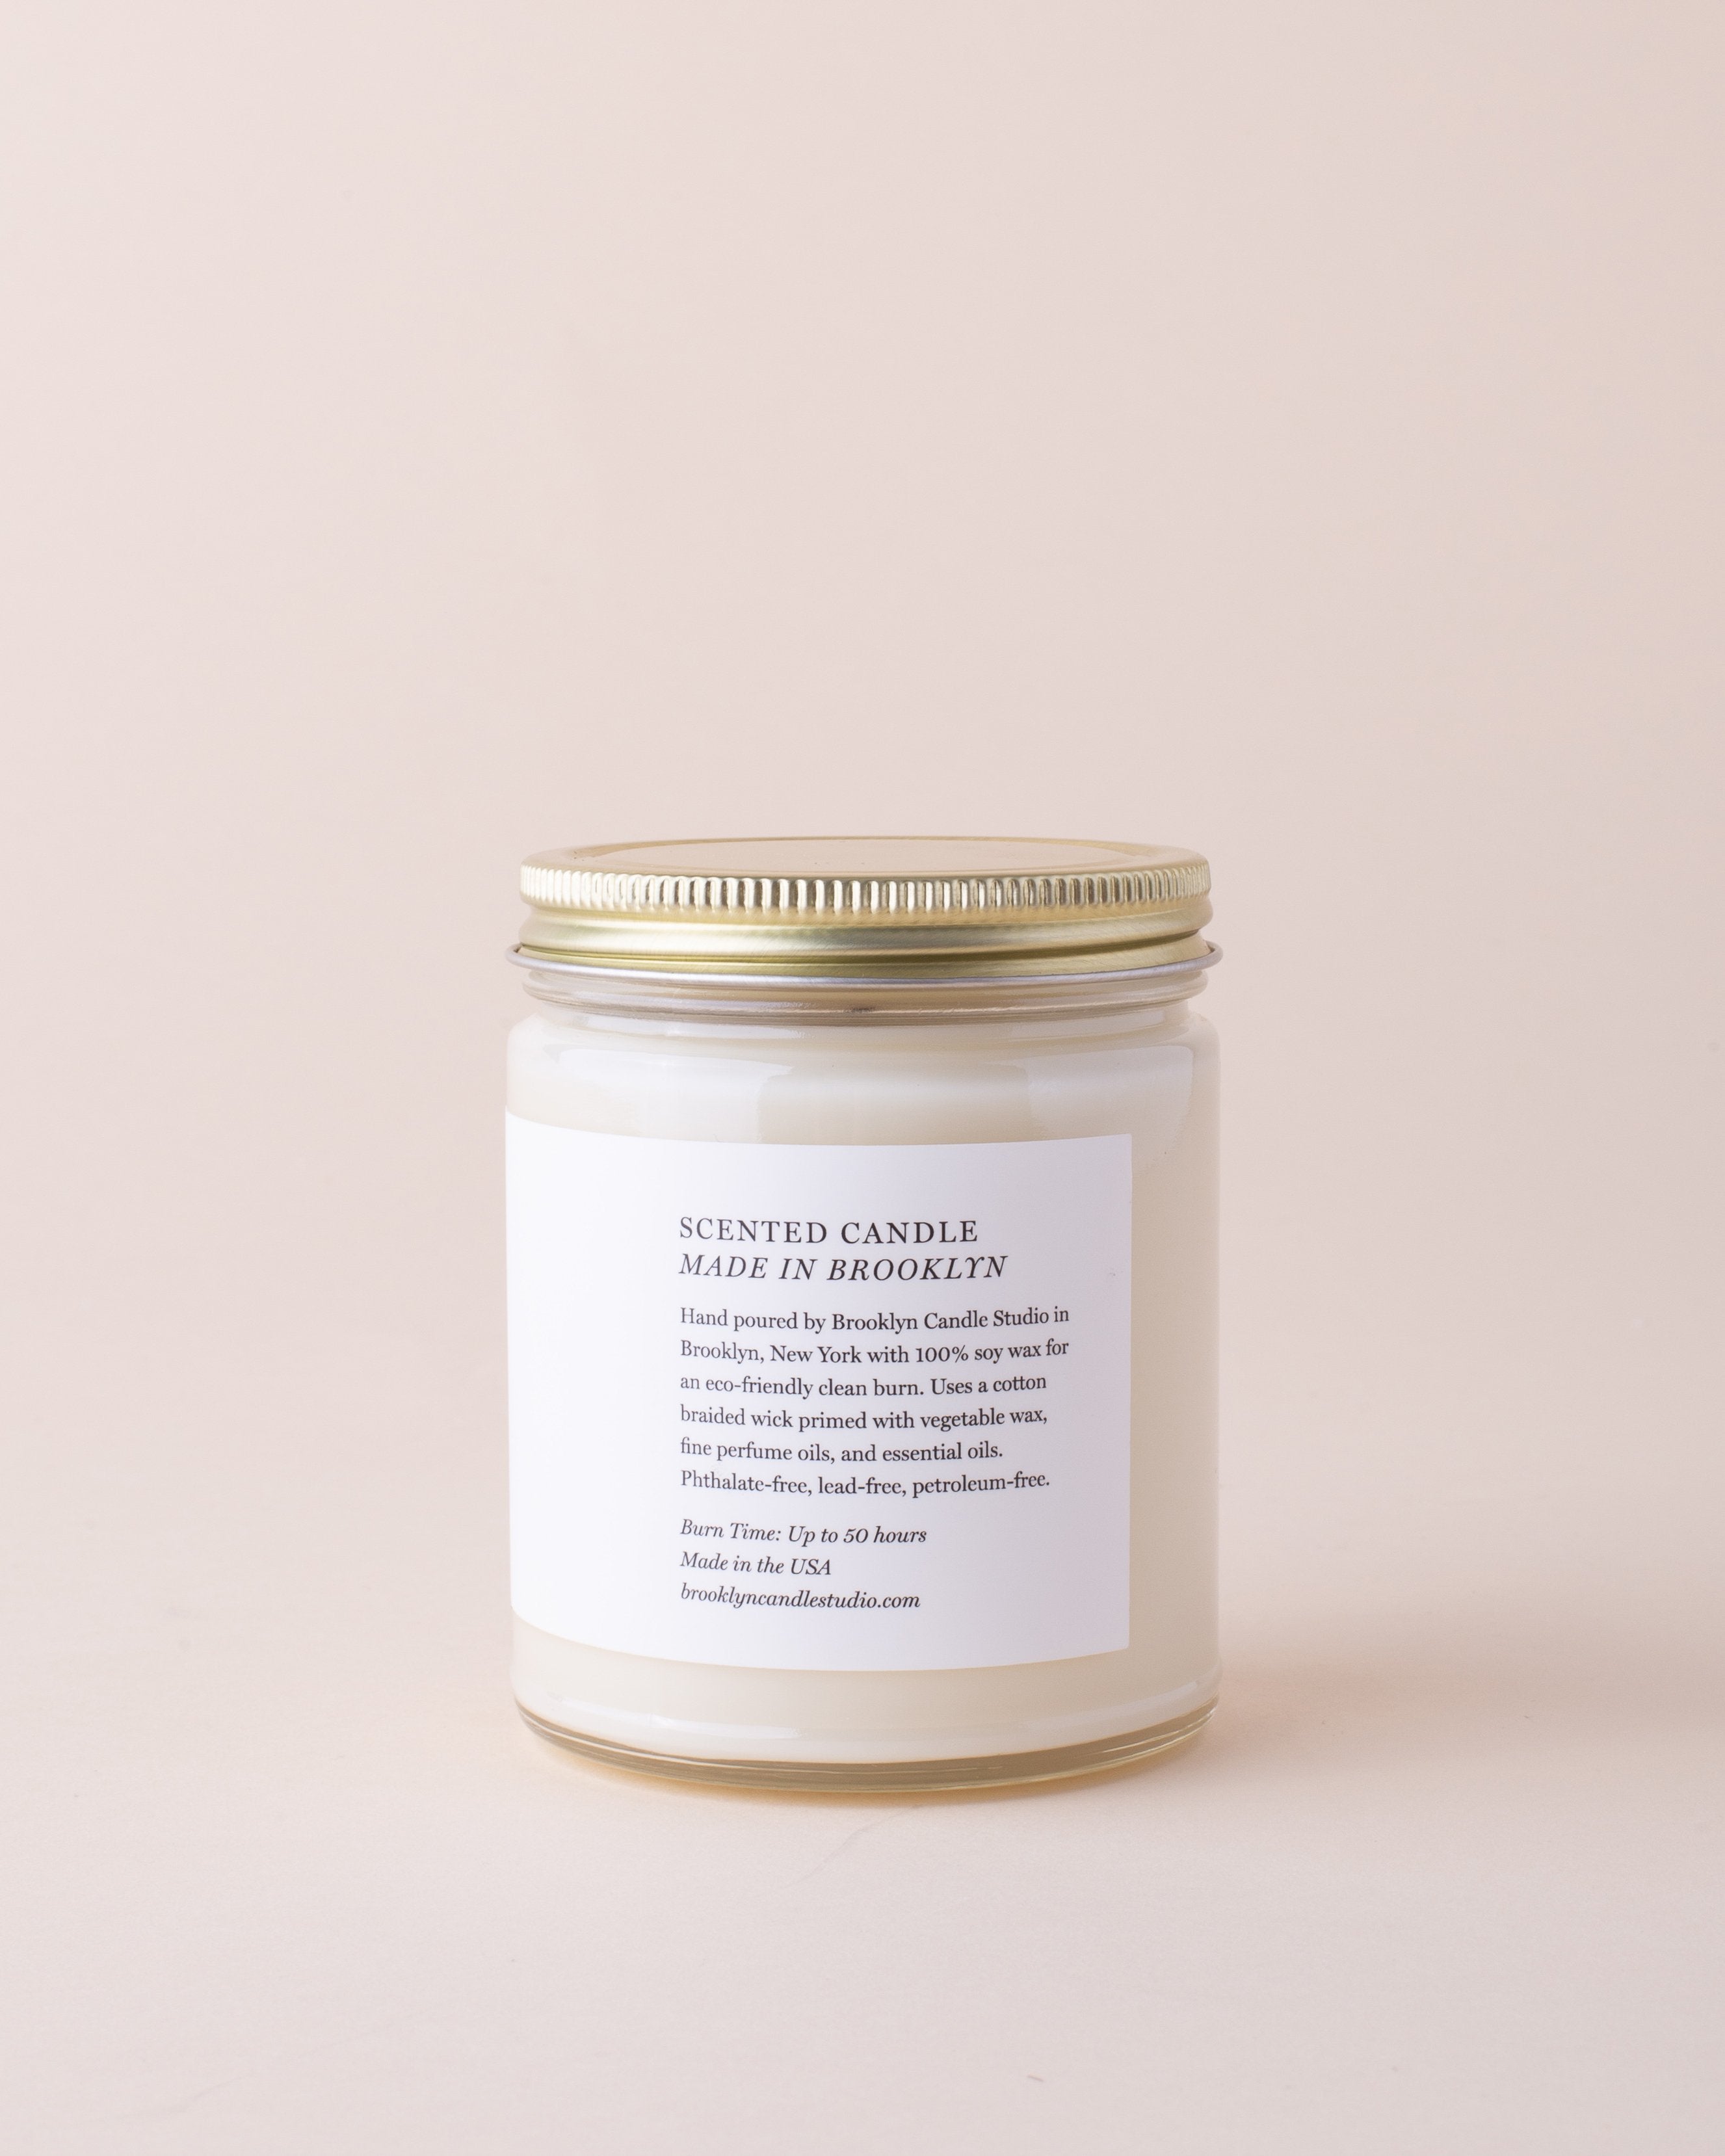 The Toasted Pumpkin Minimalist Candle by Brooklyn Candle Studio